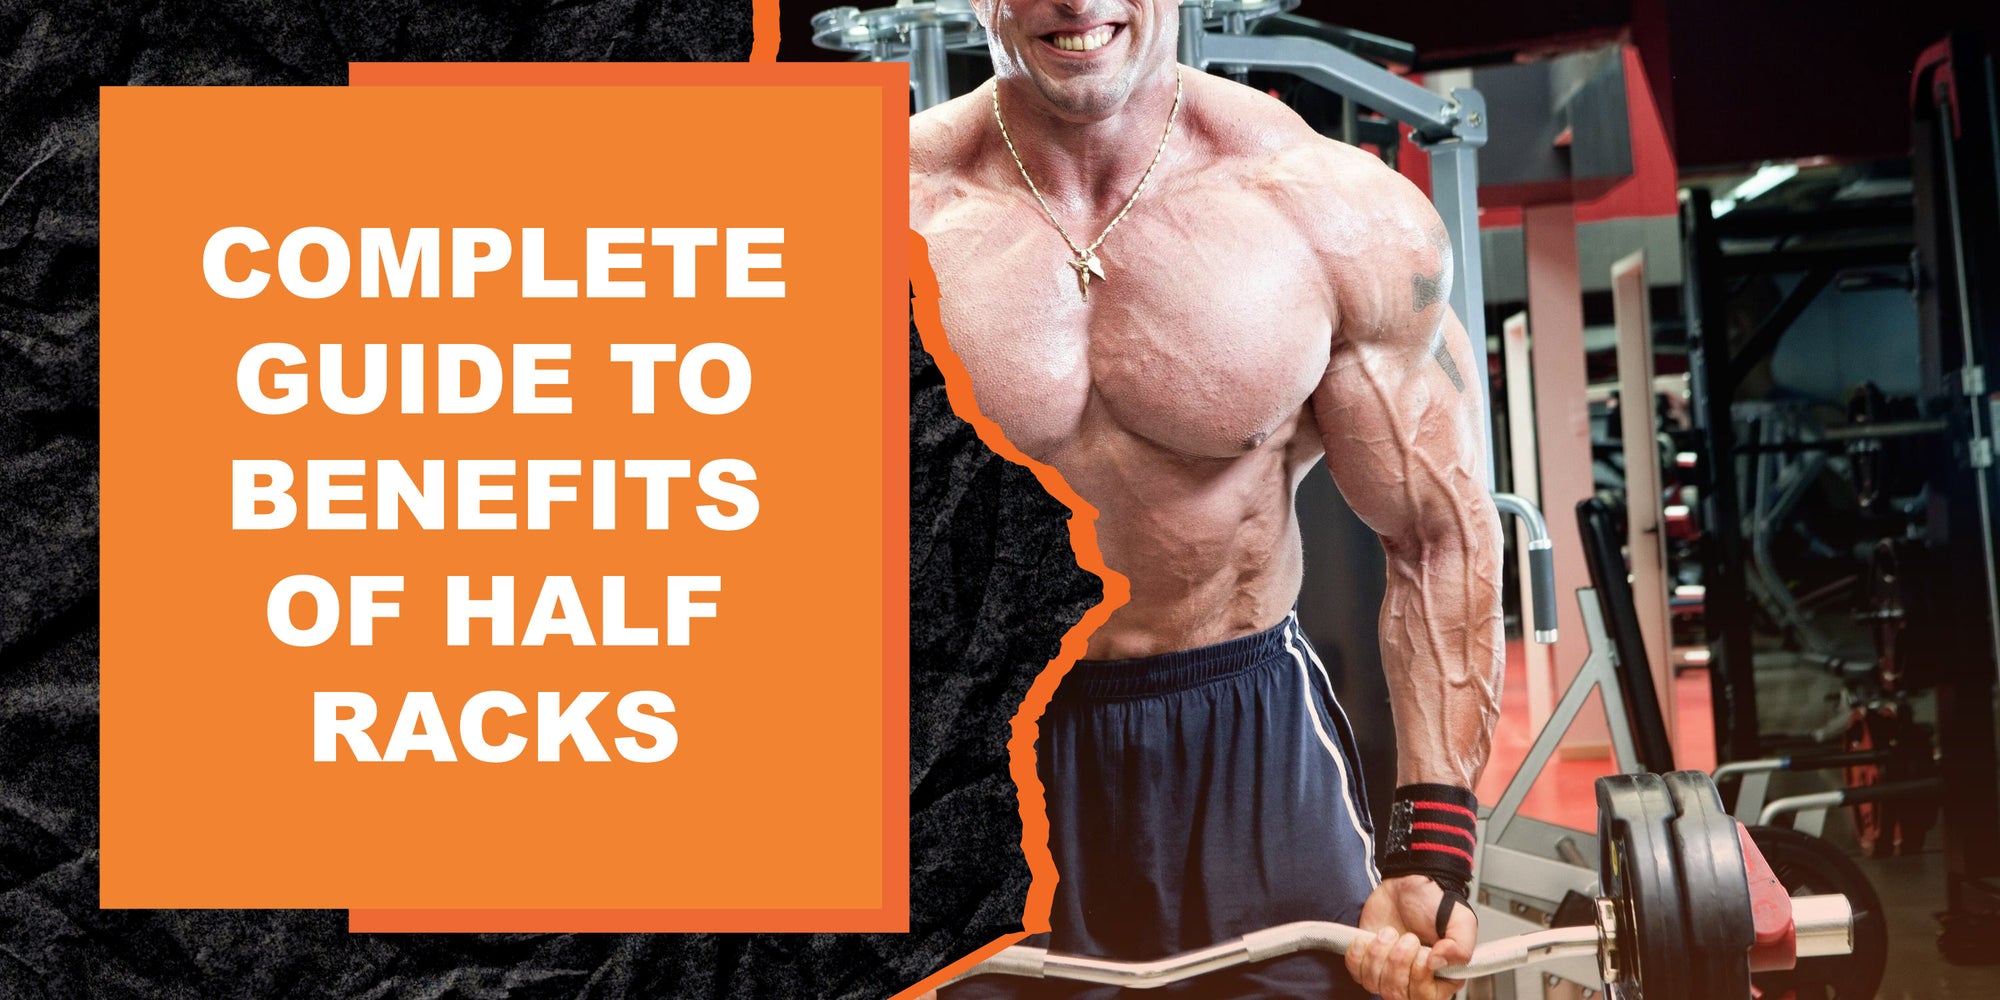 Complete Guide to Benefits of Half Racks